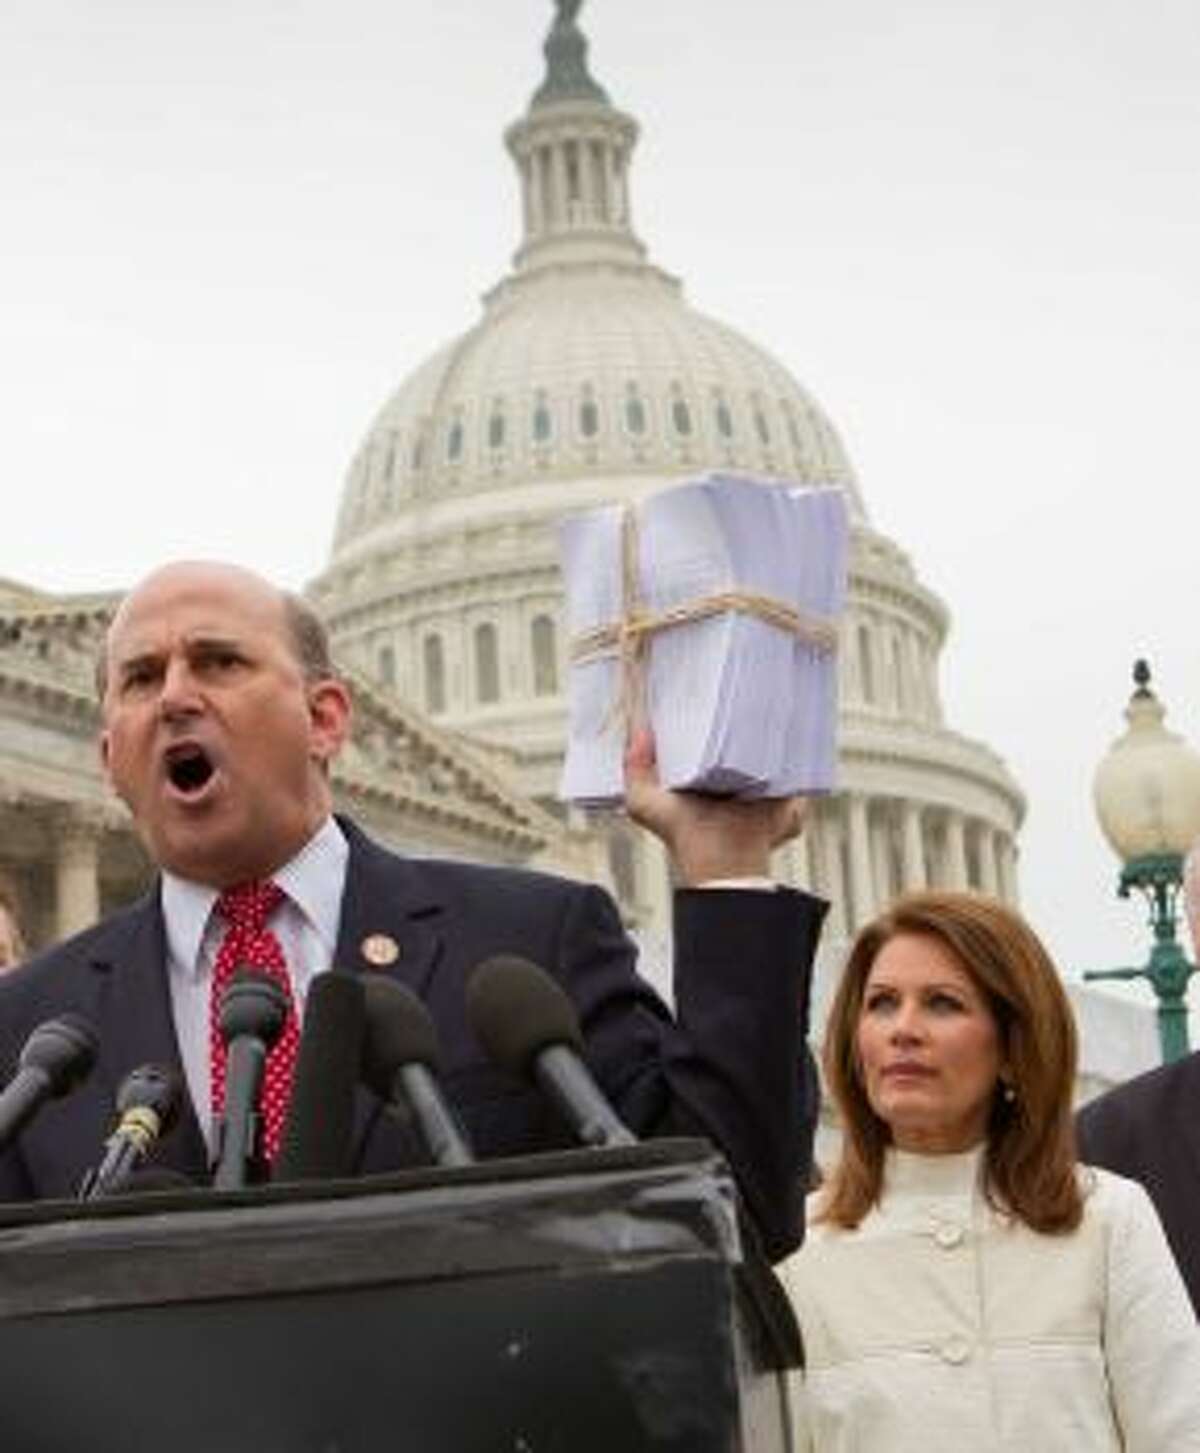 Where Cruz made health care his political trampoline, Rep. Louie Gohmert, R-Texas, has his social commentary to stand by. He and Tea Party darling Michele Bachmann were at the head of a sought-after investigation against a federal official's ties to the Muslim Brotherhood. The move was slammed by both parties.